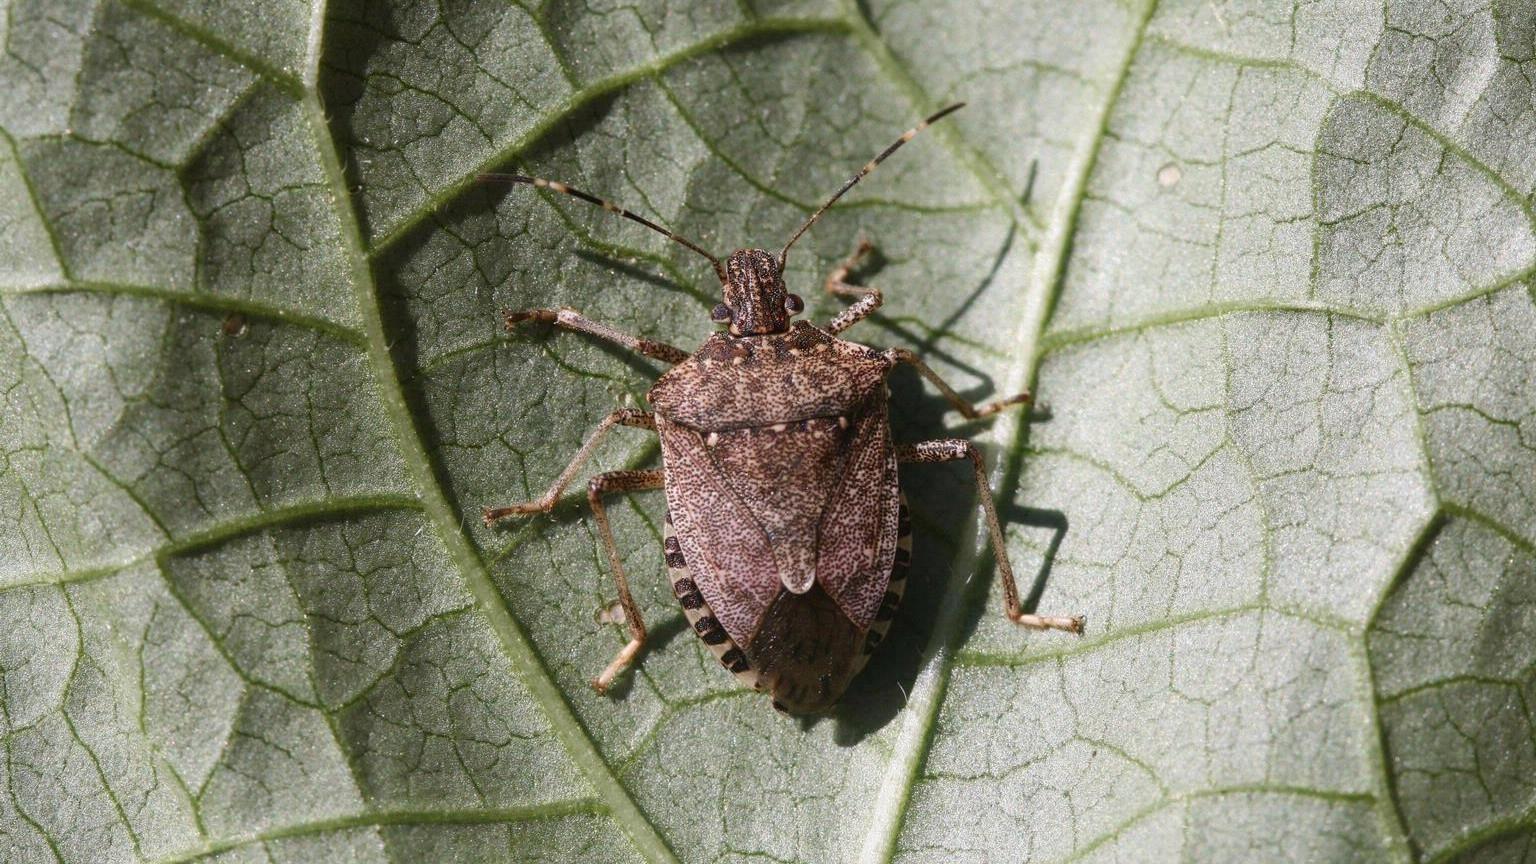 Marmorated stink bug brown The Brown